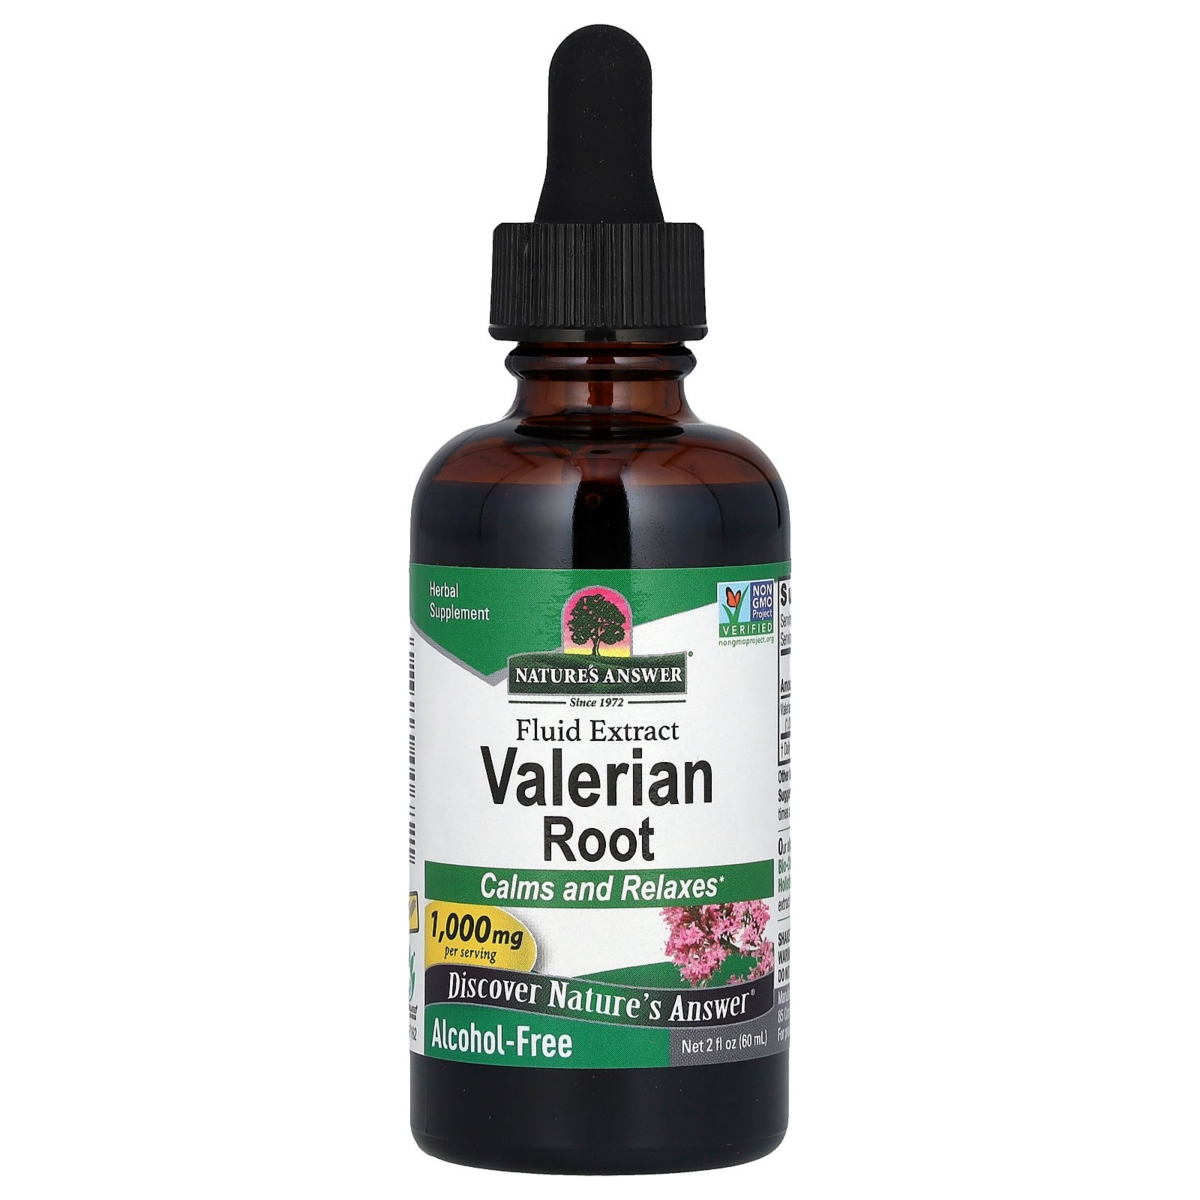 Valerian Root Fluid Extract Alcohol-Free 1 000 mg - 2 fl oz (60 ml) - Assorted Pre-pack (See Table